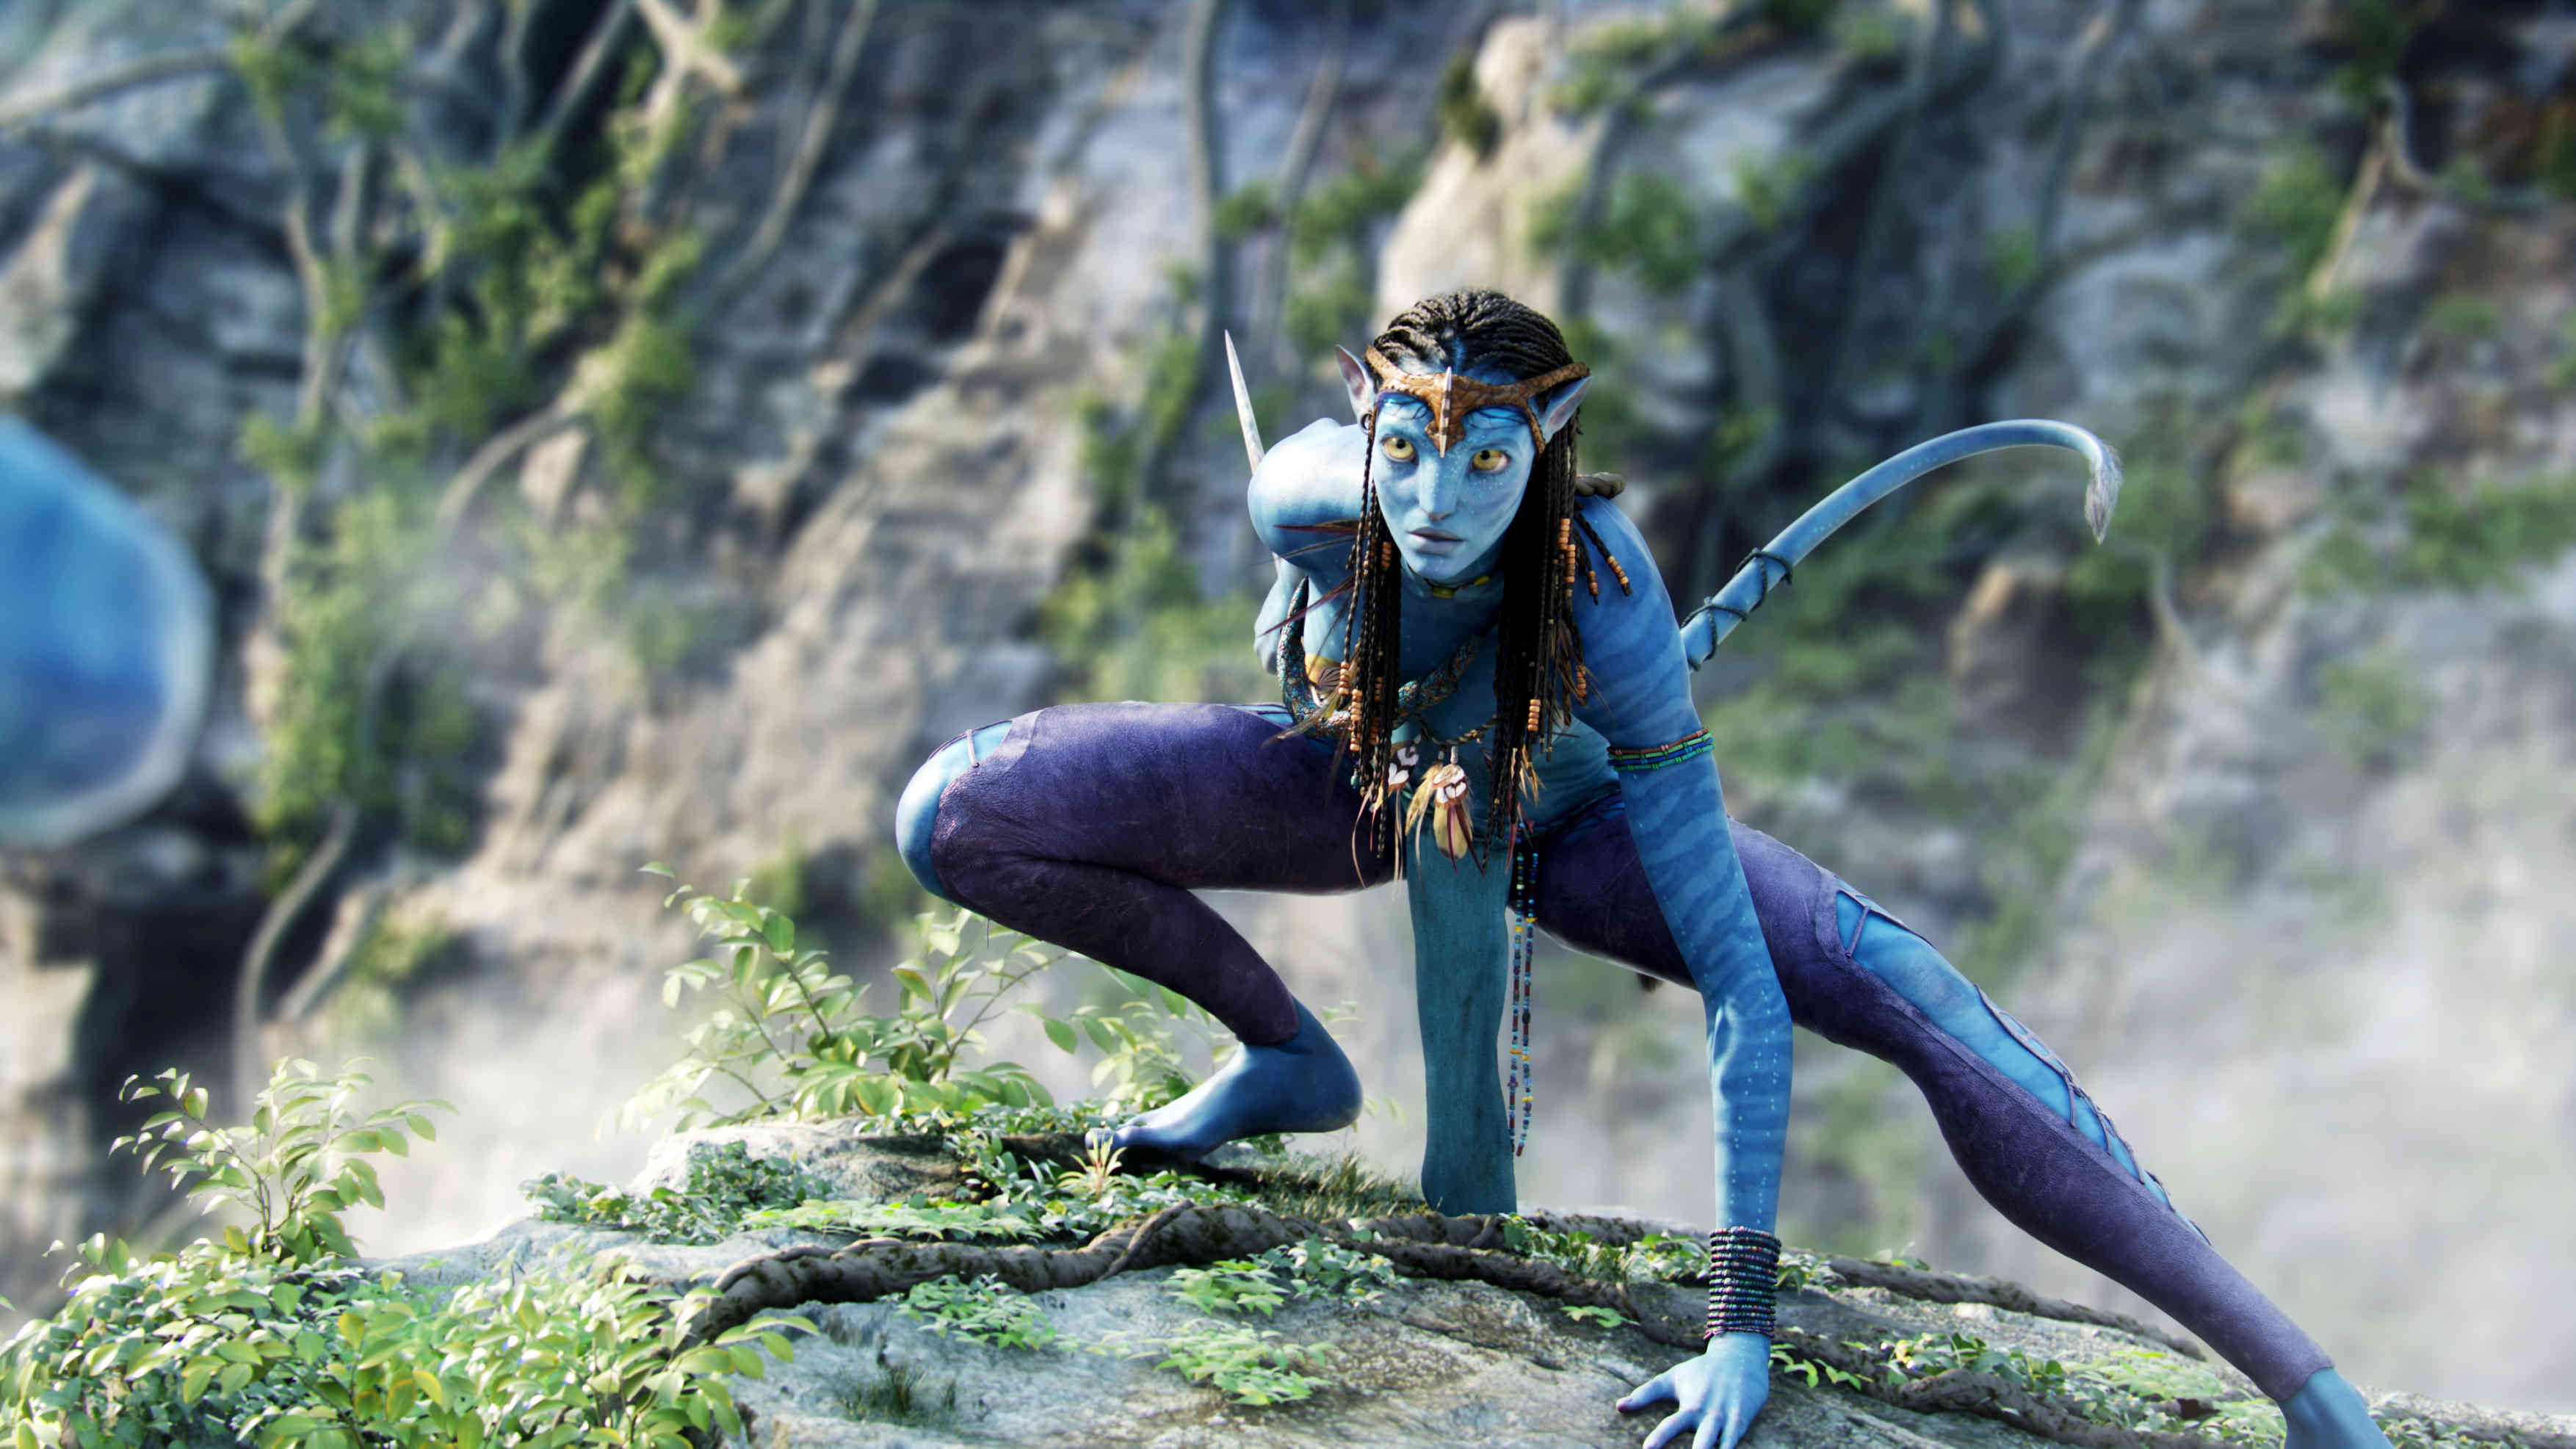 A scene from The 20th Century Fox's Avatar (2009)